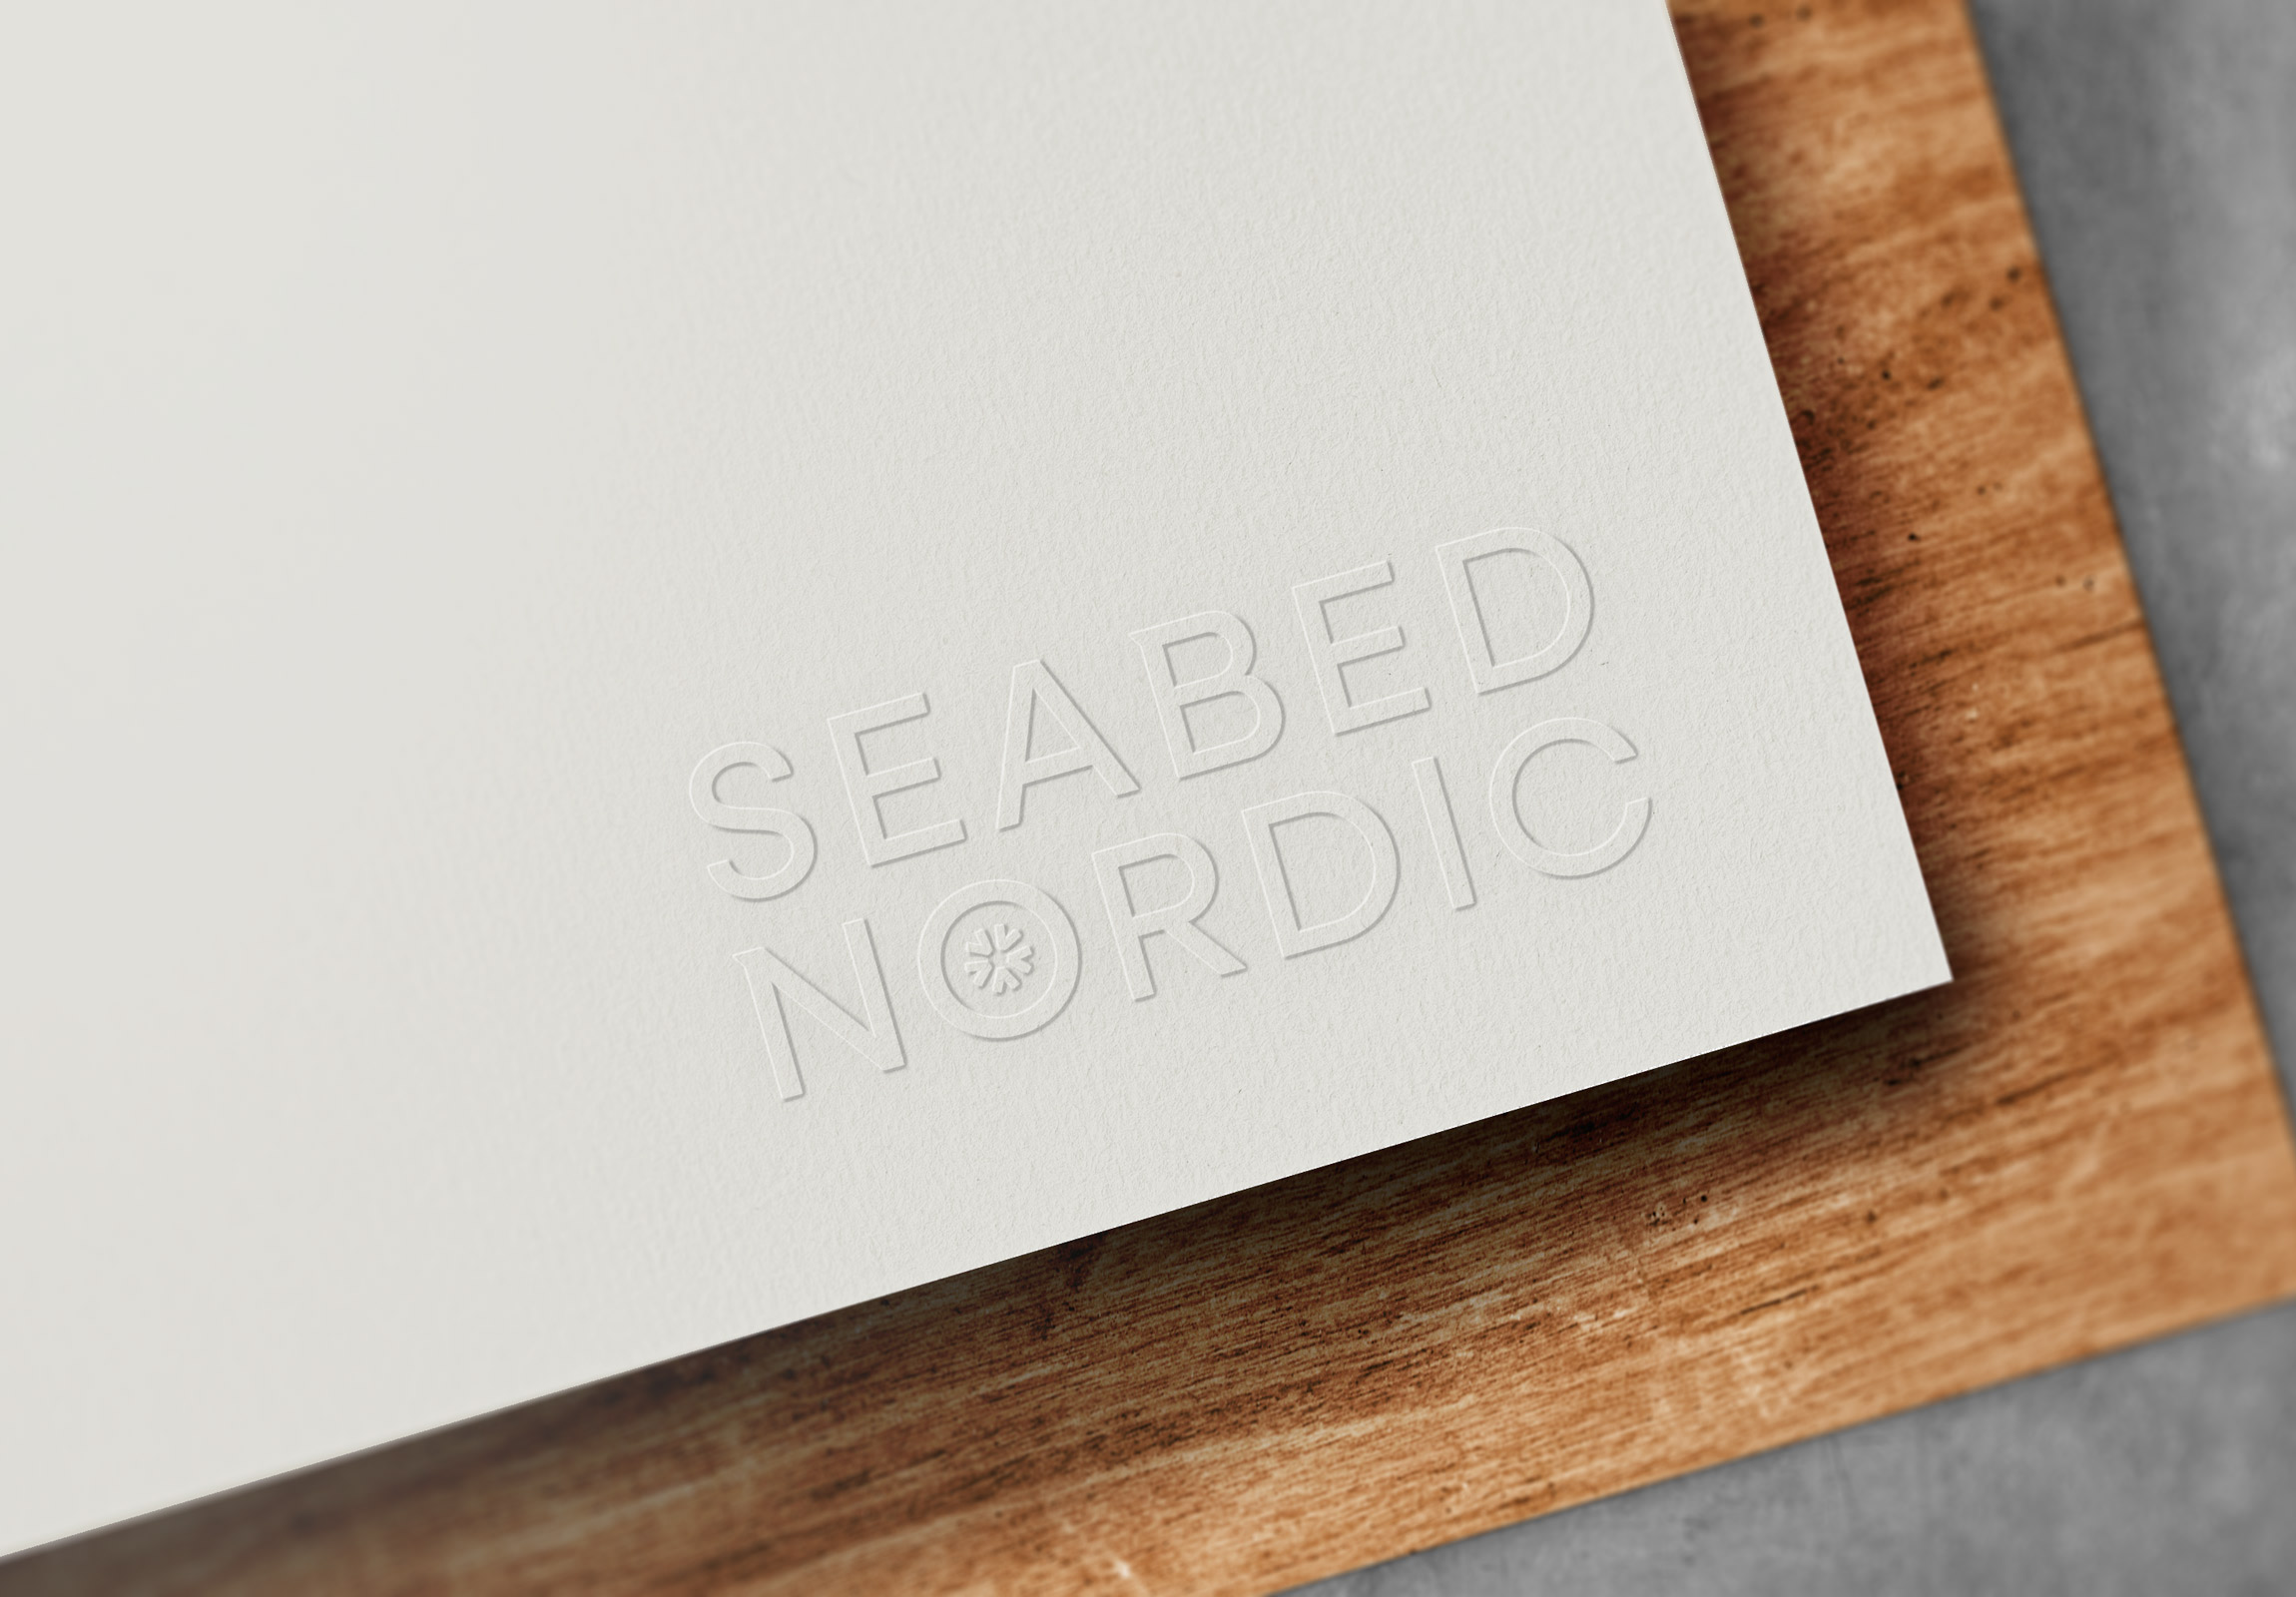 Seabed Nordic Dives into Global Waters with Strategic Rebrand by Petchy